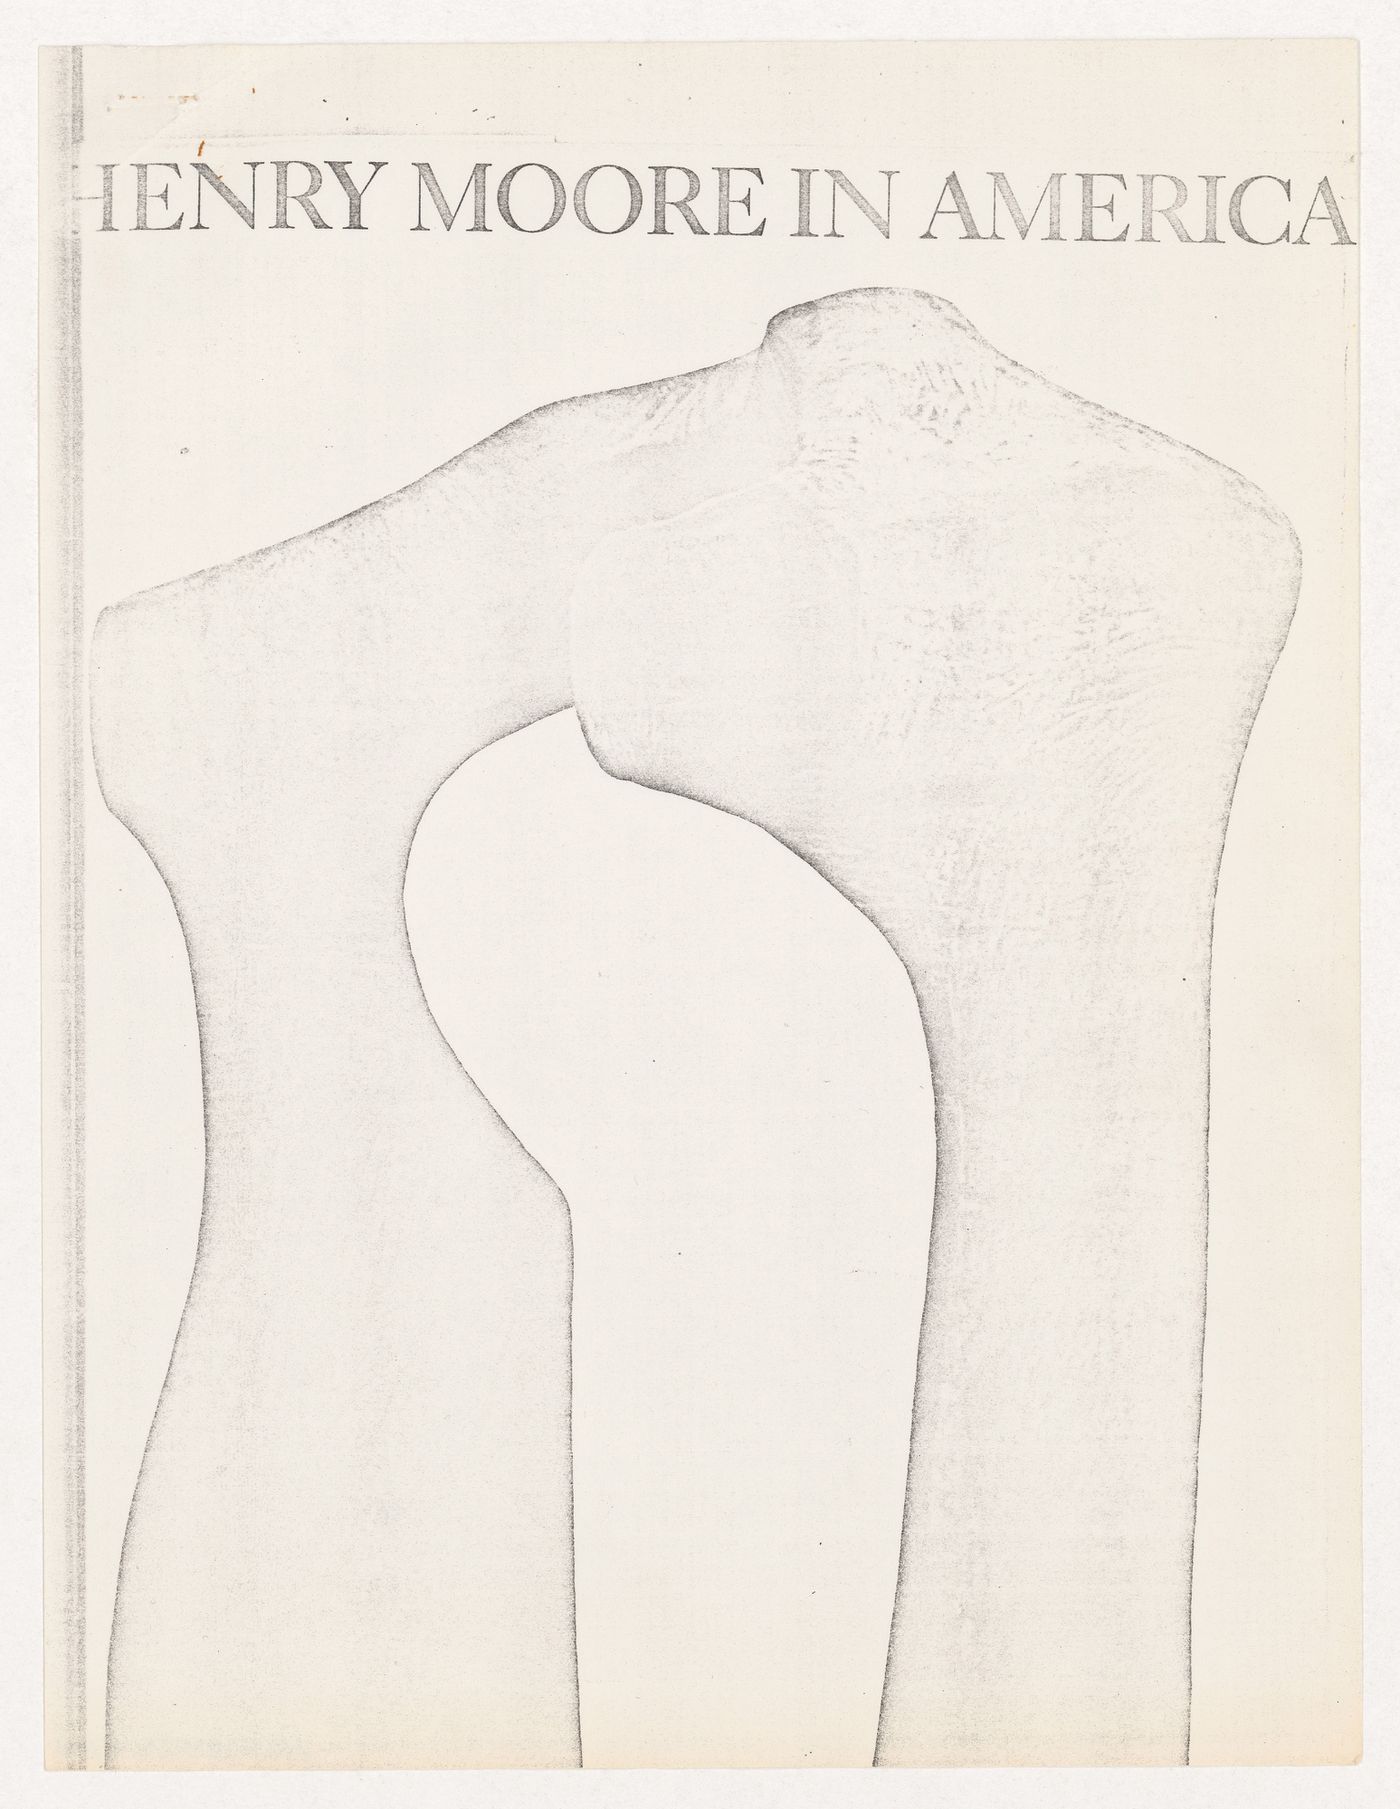 "Henry Moore in America" photocopy of published article with annotations